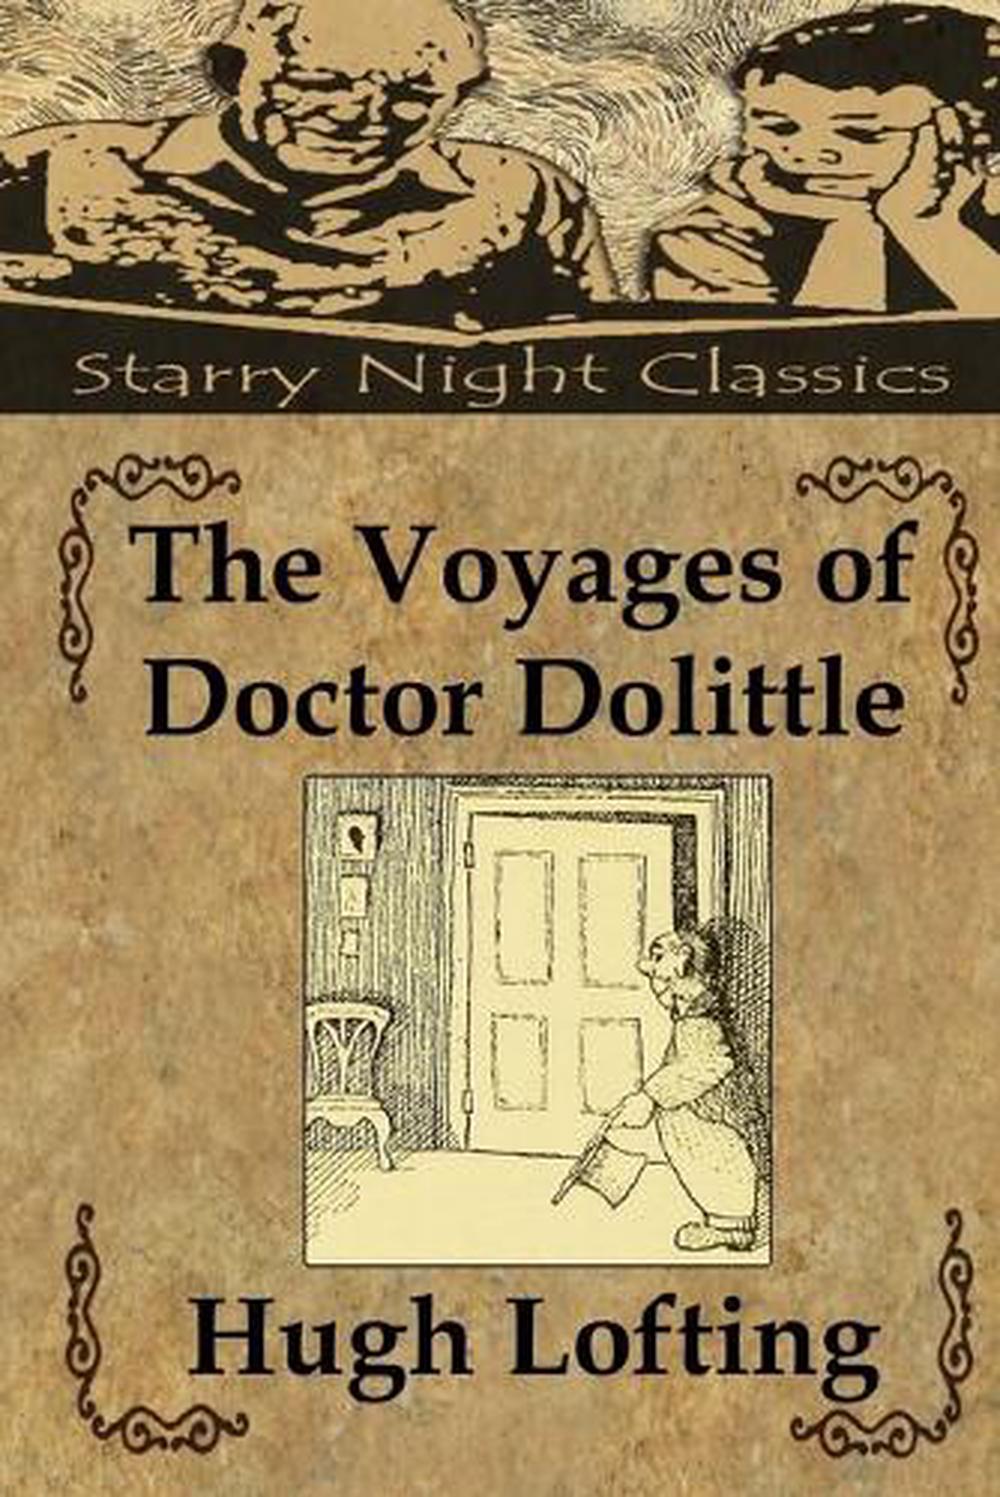 the voyages of doctor dolittle by hugh lofting